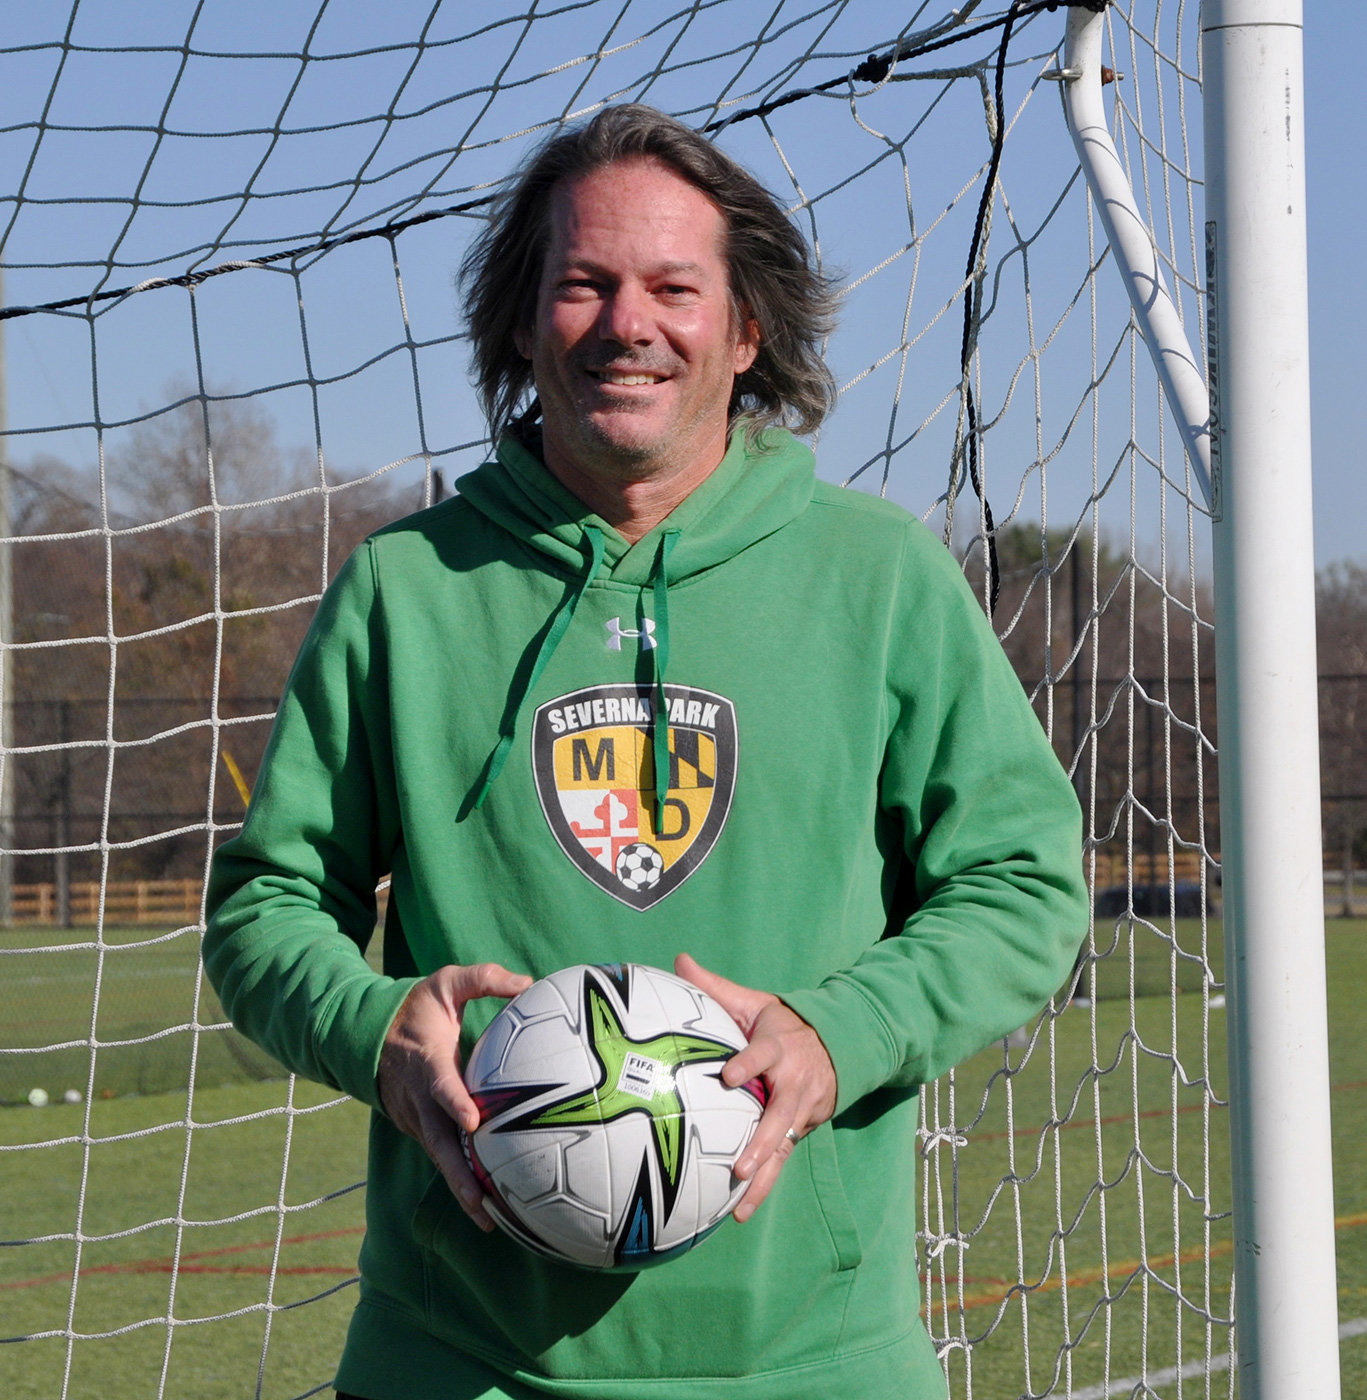 As the soccer commissioner for Green Hornets, Matt Souder ensures practice fields are ready to play, formulates game schedules, orders uniforms and equipment, organizes hundreds of volunteers and runs the youth referee program.